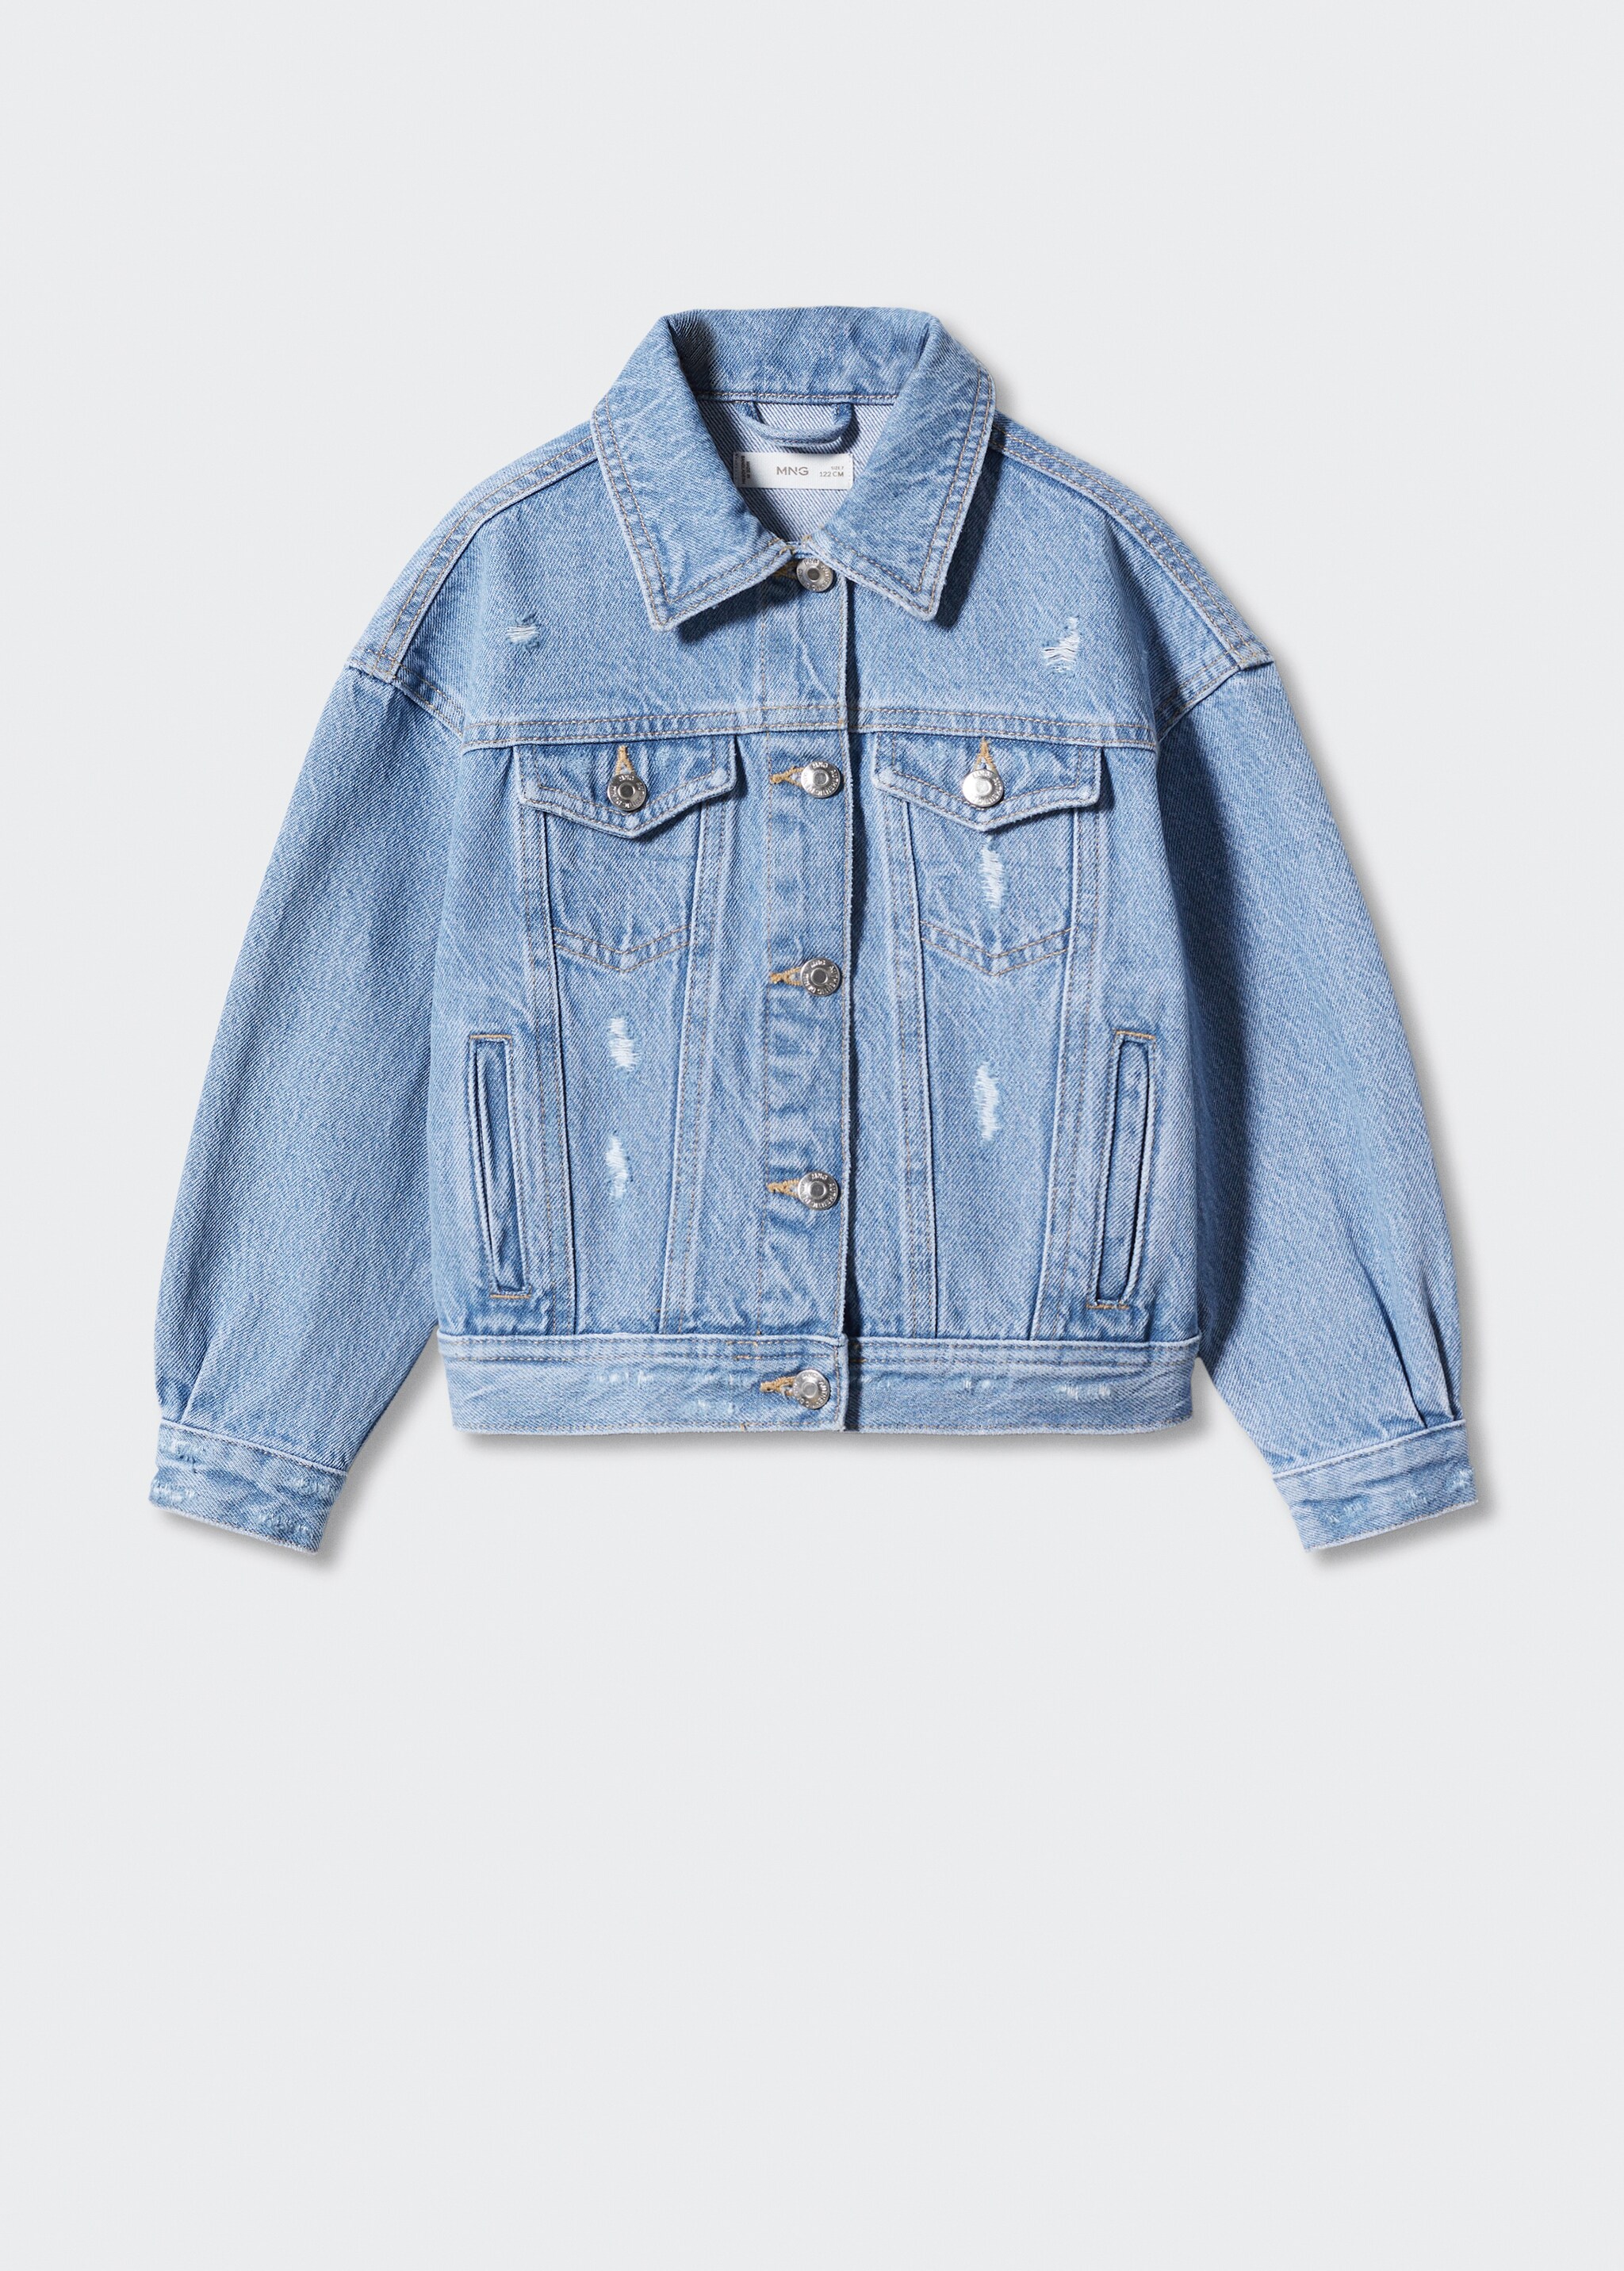 Denim jacket with decorative rips - Article without model